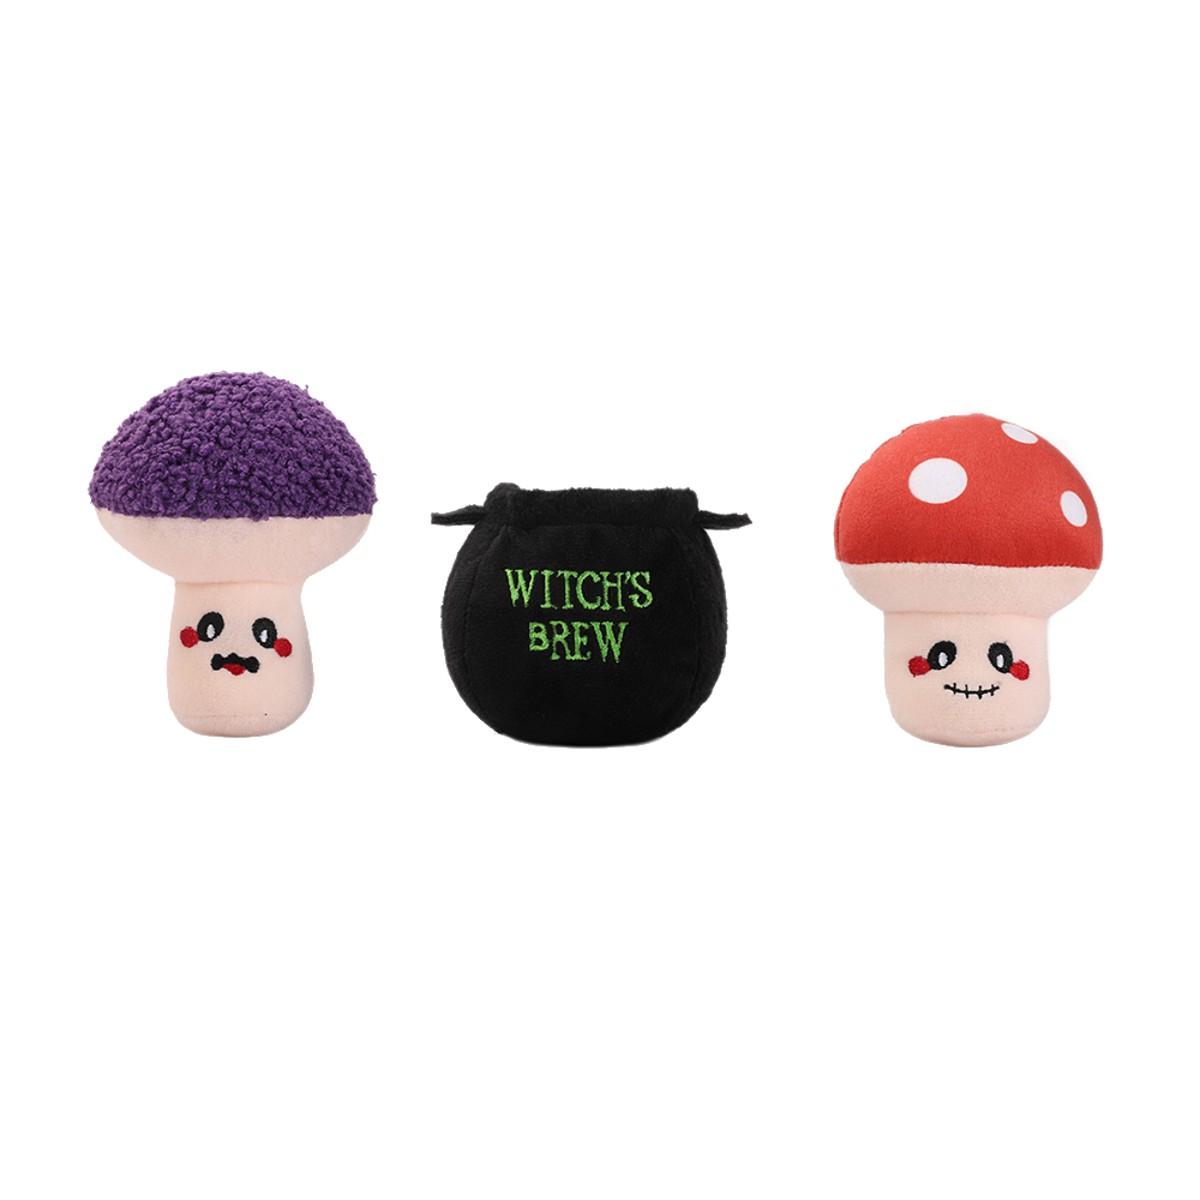 HugSmart Halloween Witchy Dog Toy - Witches Brew